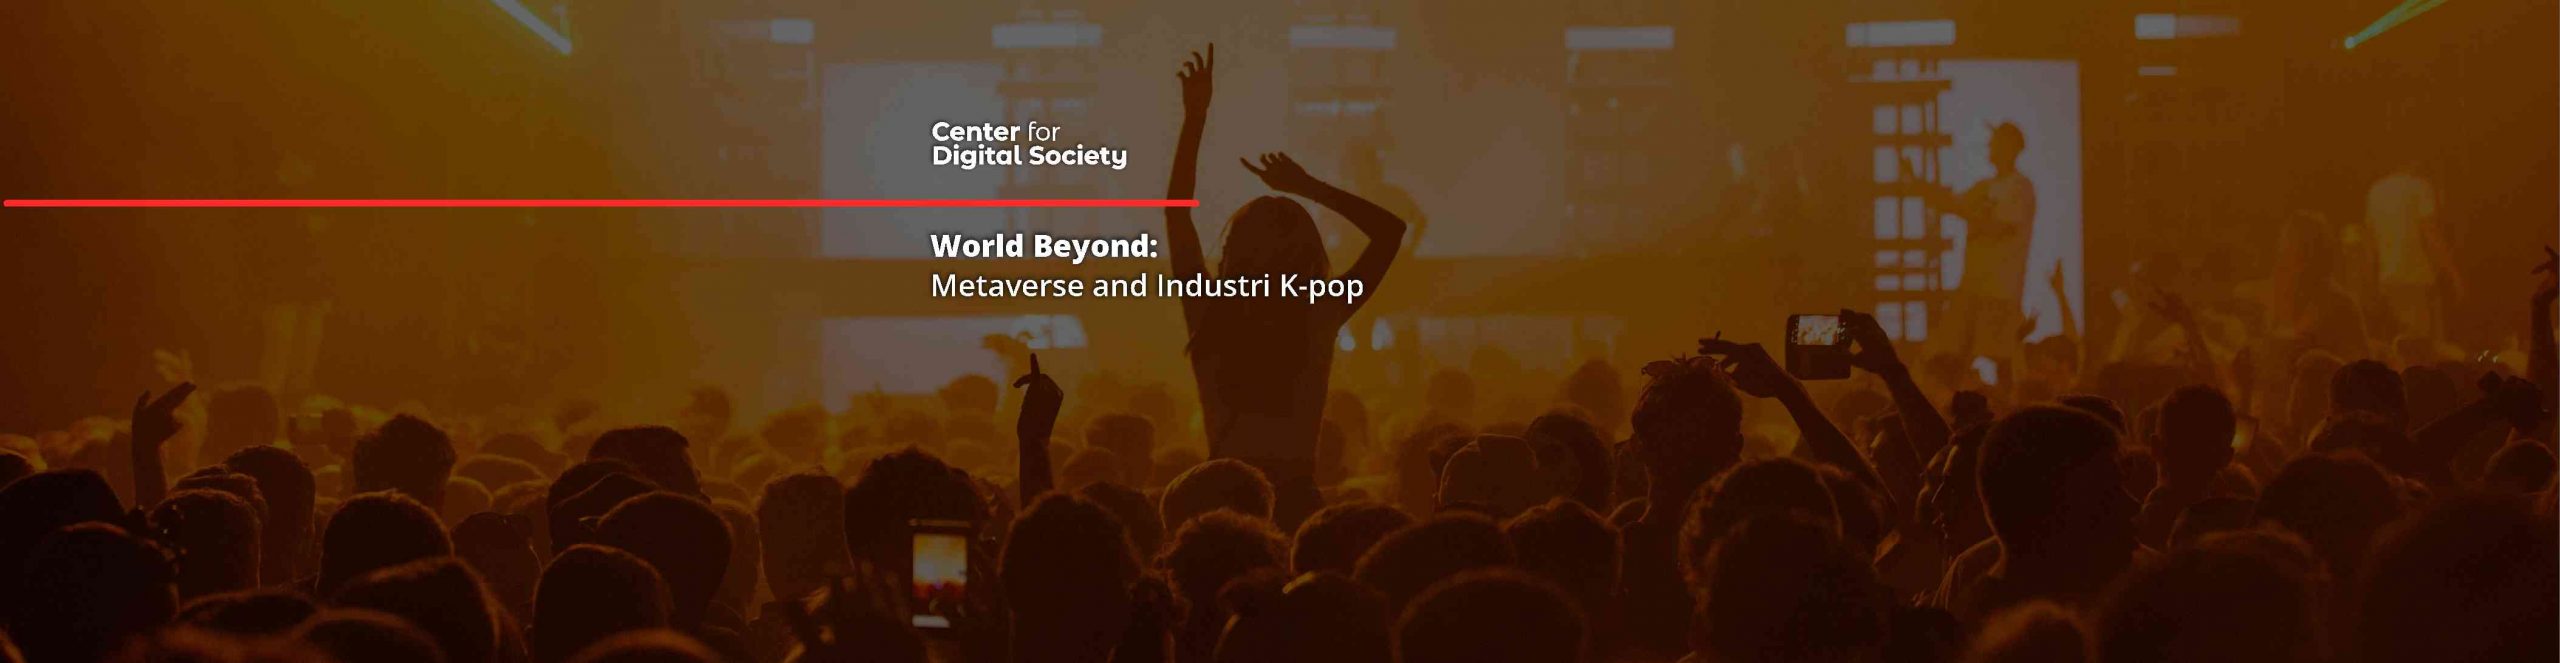 A World Beyond: Metaverse and the K-pop Industry